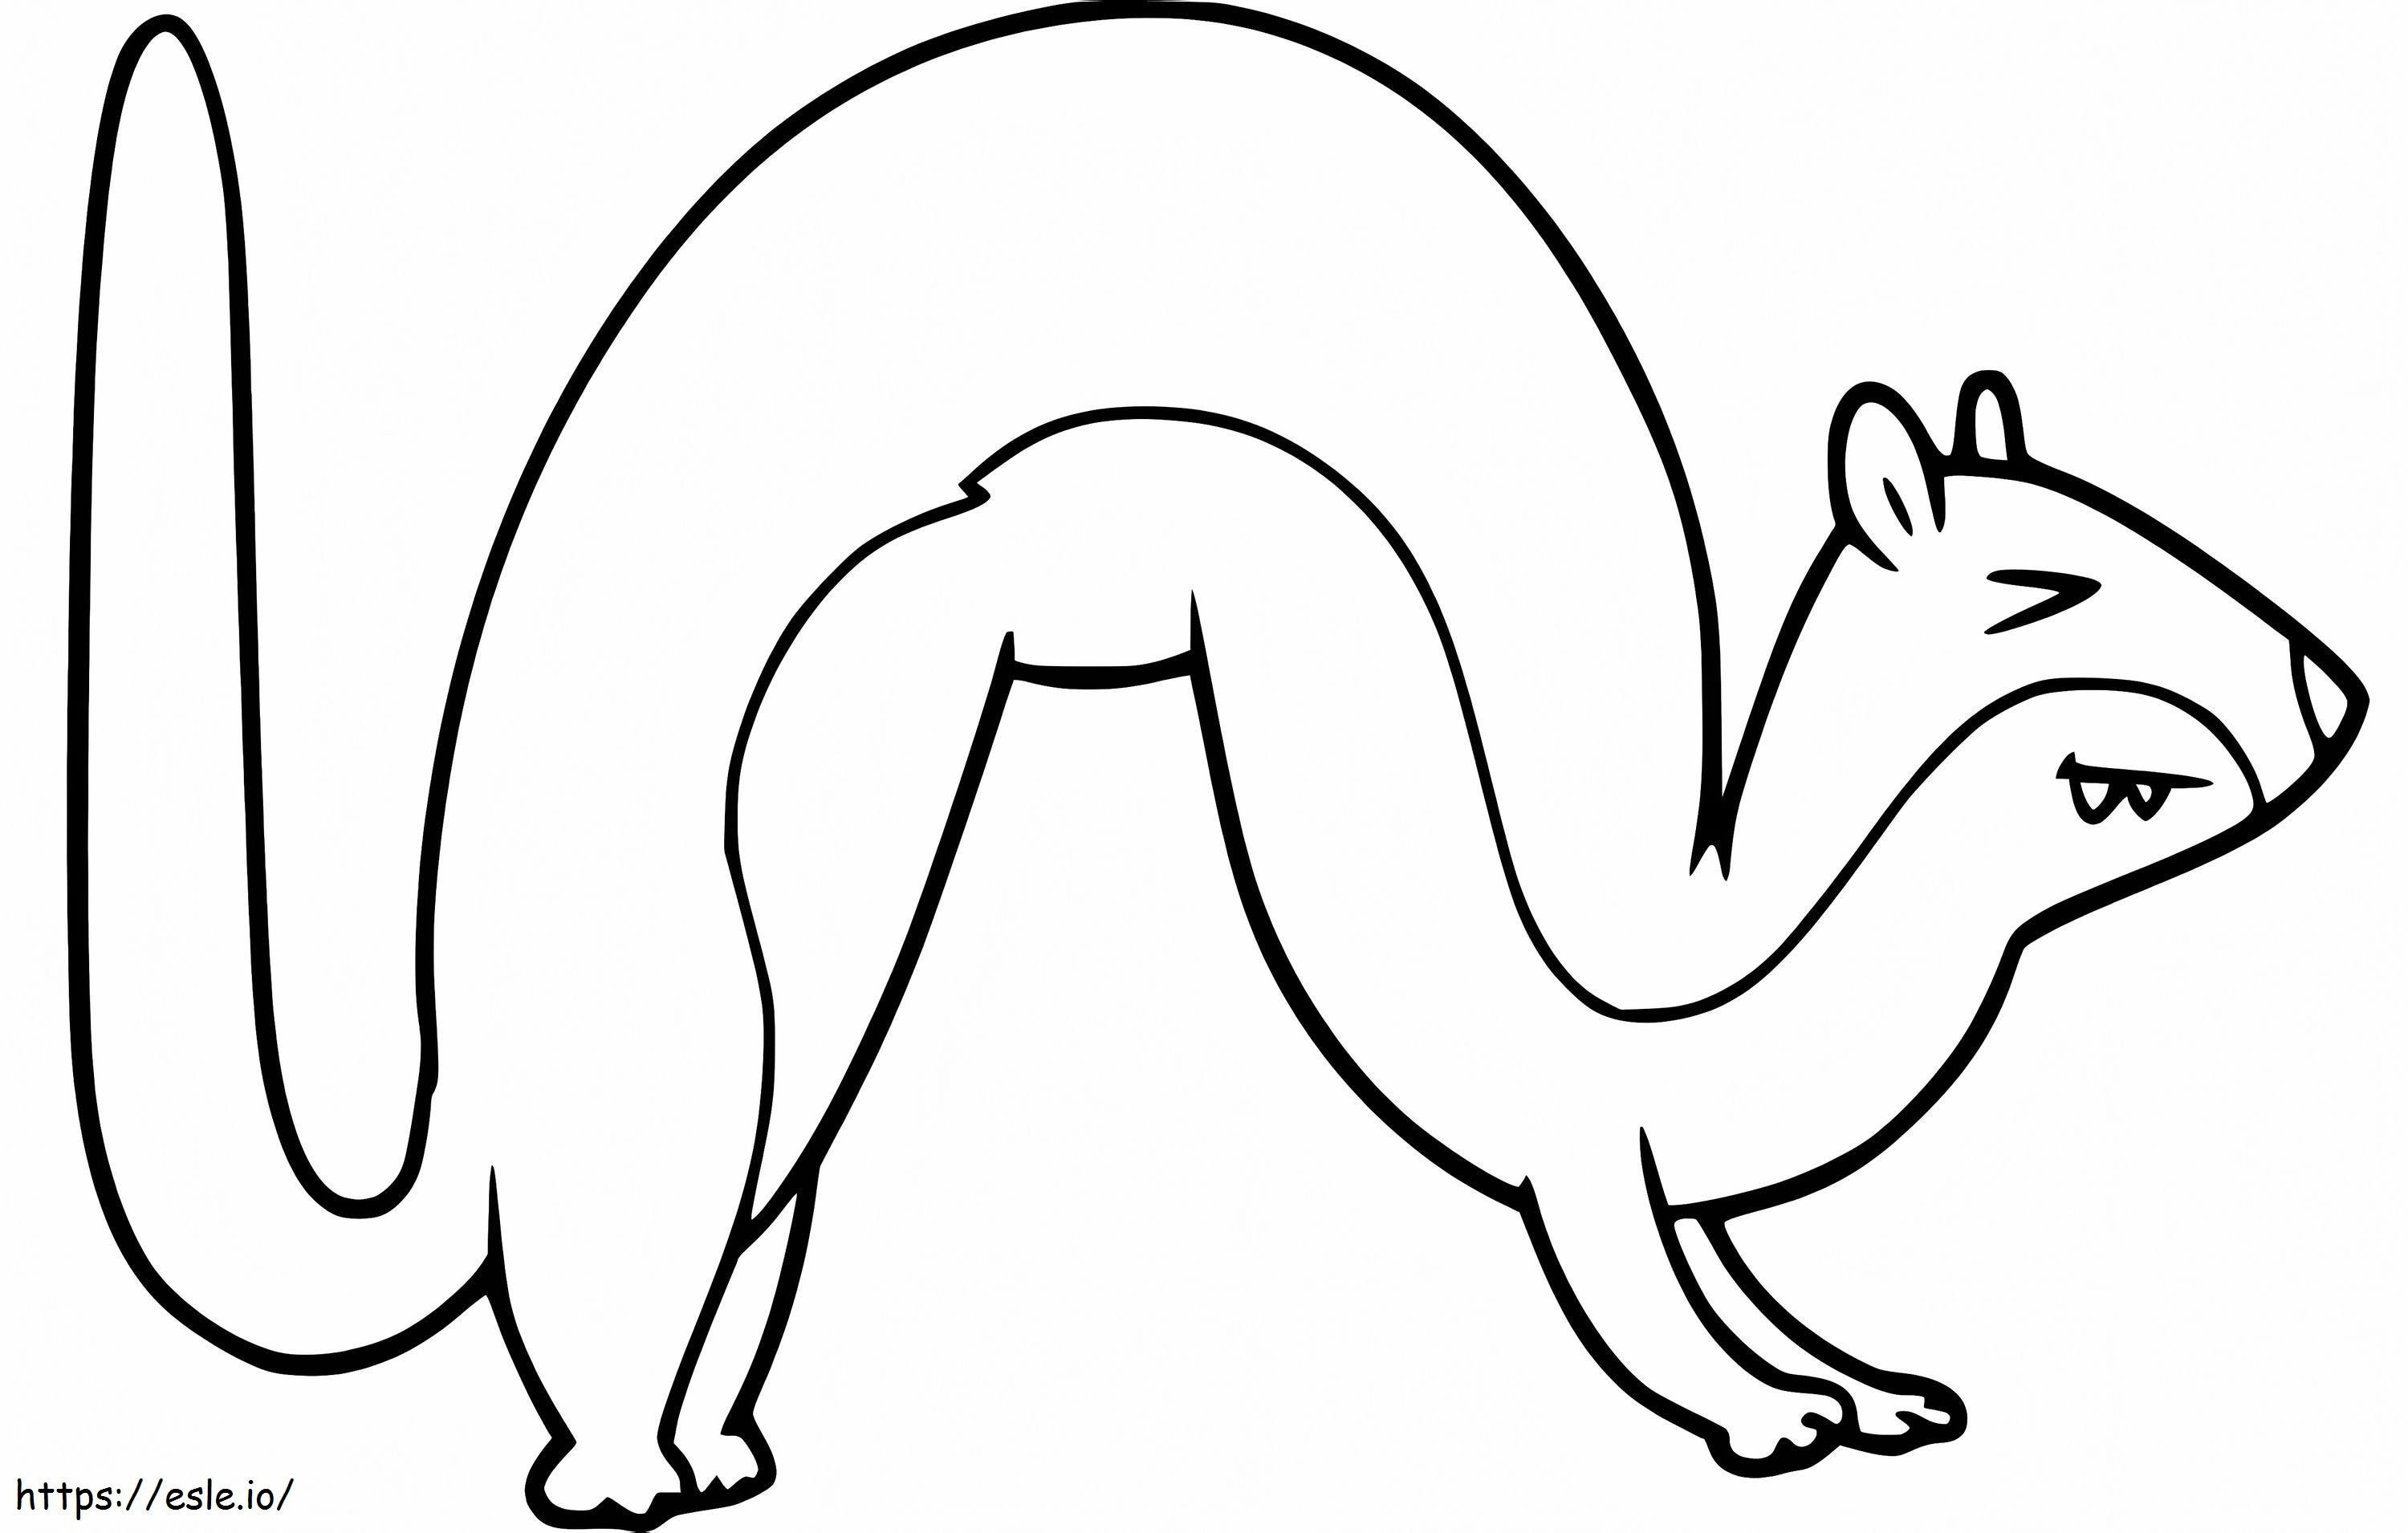 Fun Weasel coloring page